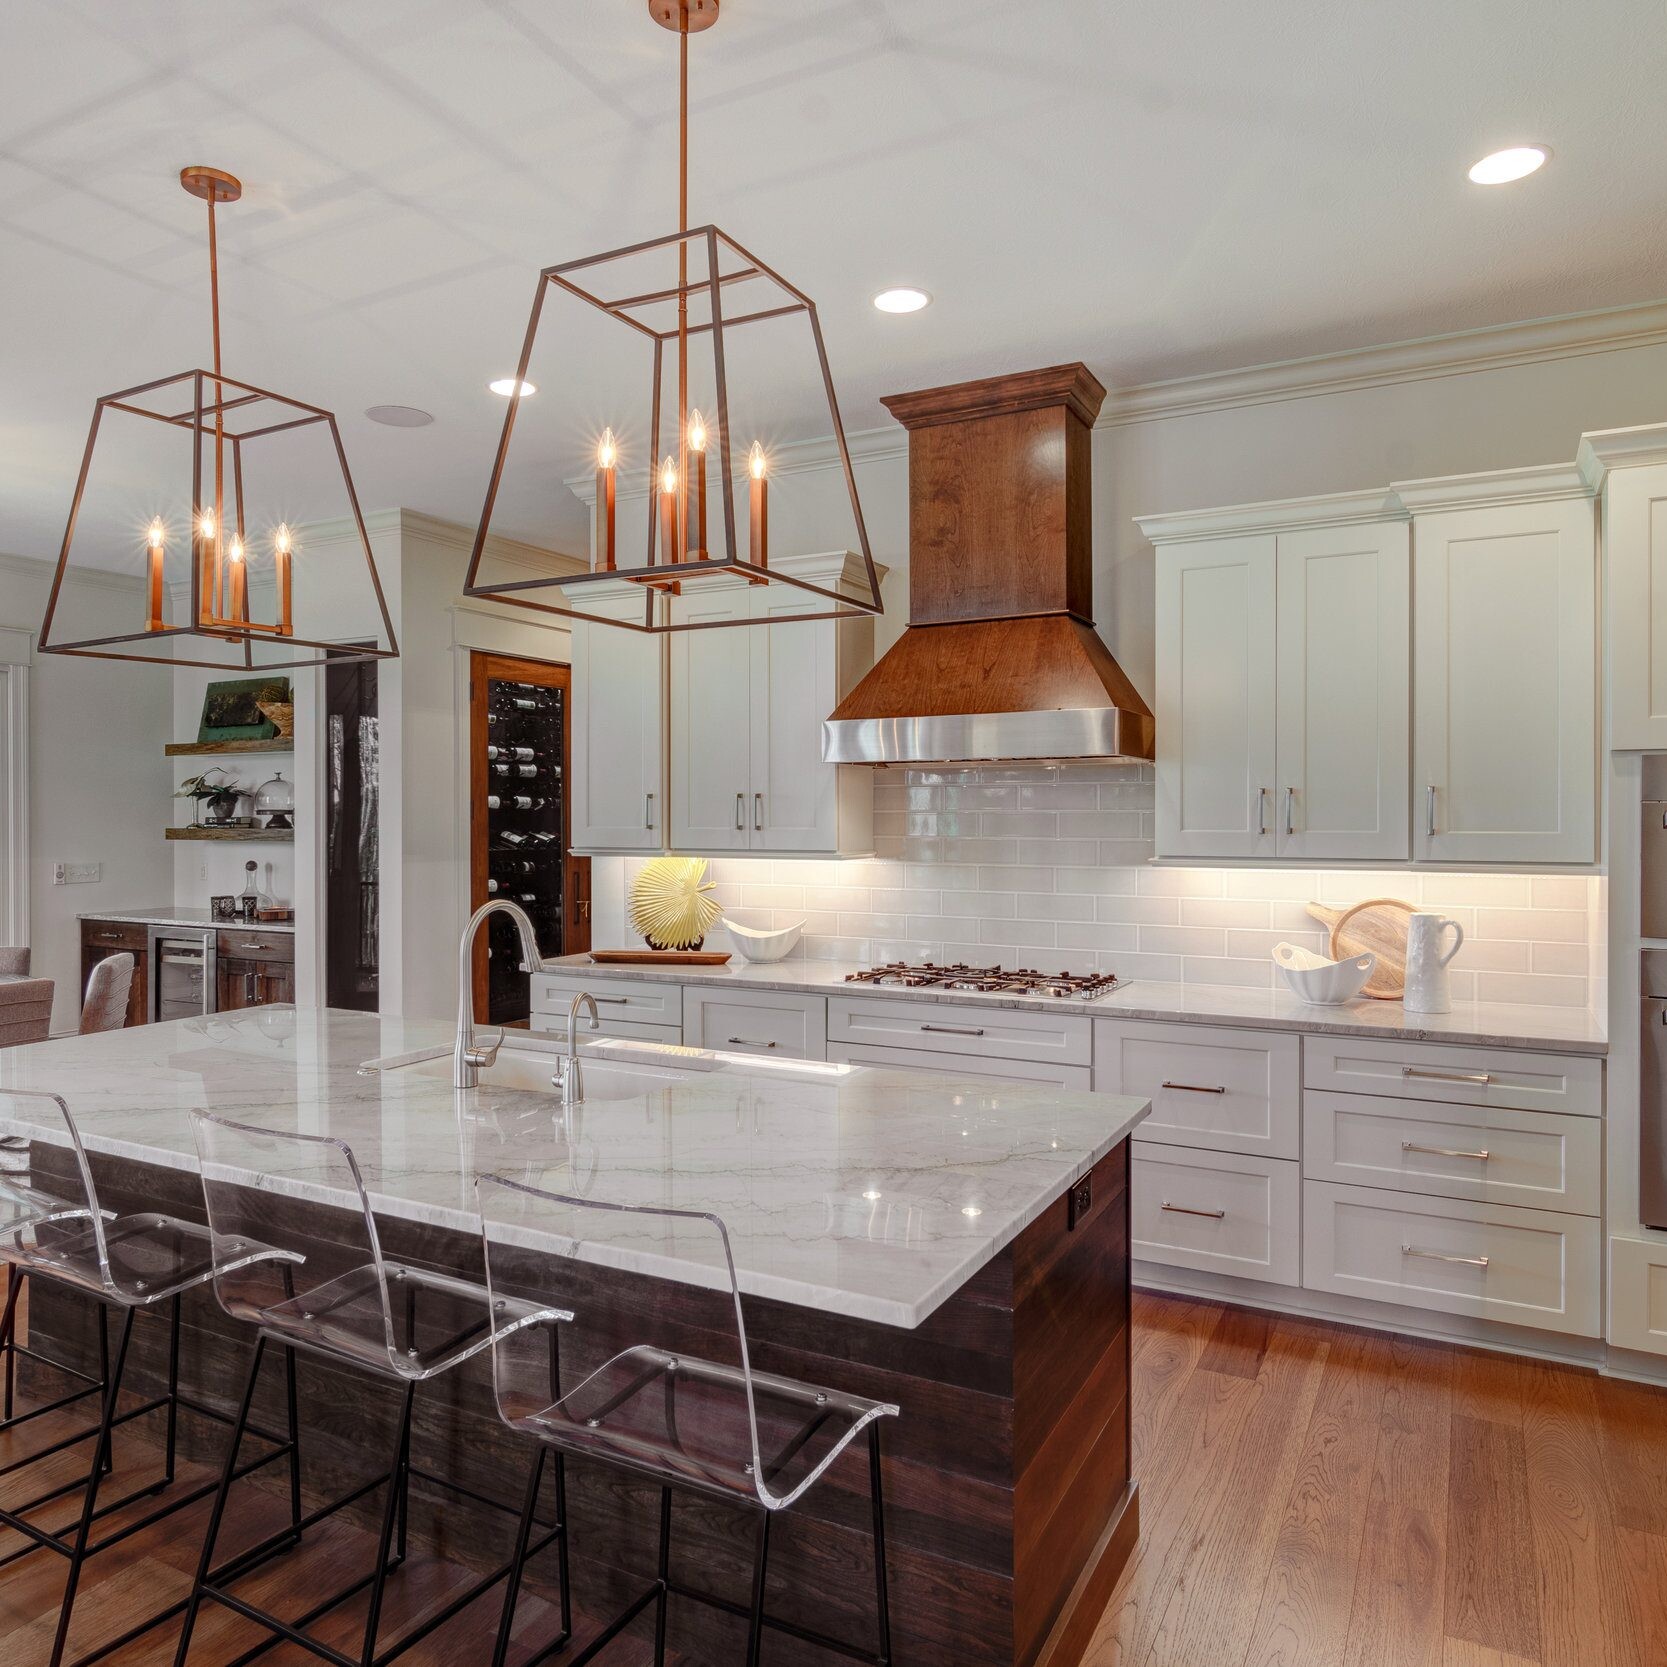 A newly constructed kitchen featuring a spacious island and stylish bar stools.